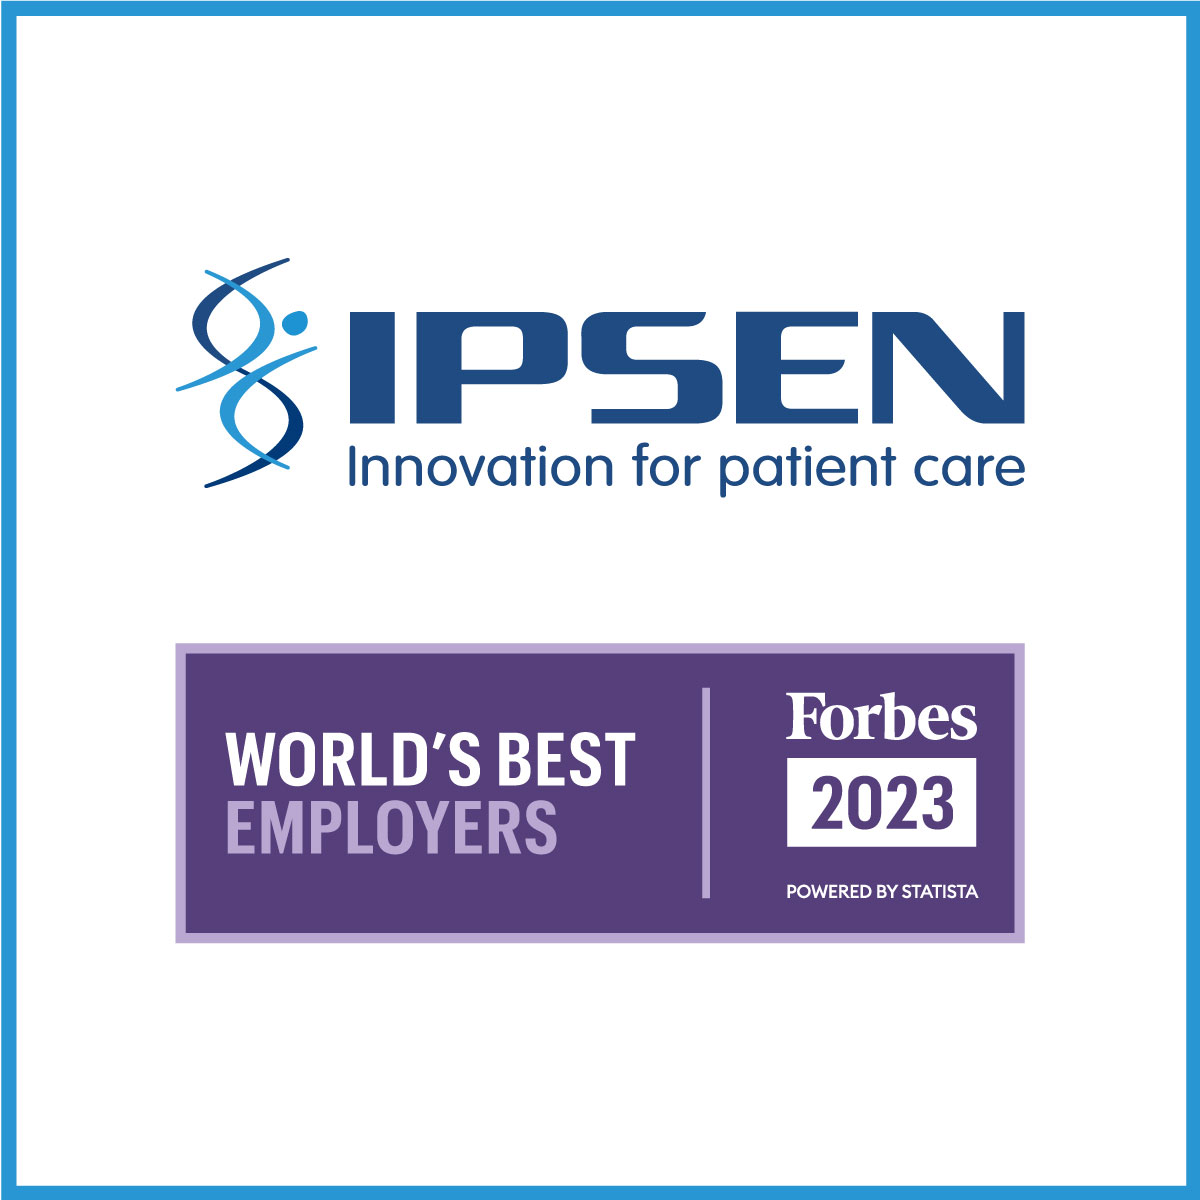 We are delighted to have been named one of the world’s best employers 🌟 by @Forbes magazine in 2023. 🎉 Bravo to our teams for making Ipsen a truly outstanding workplace! 👏ipsen.com/general/ipsen-…